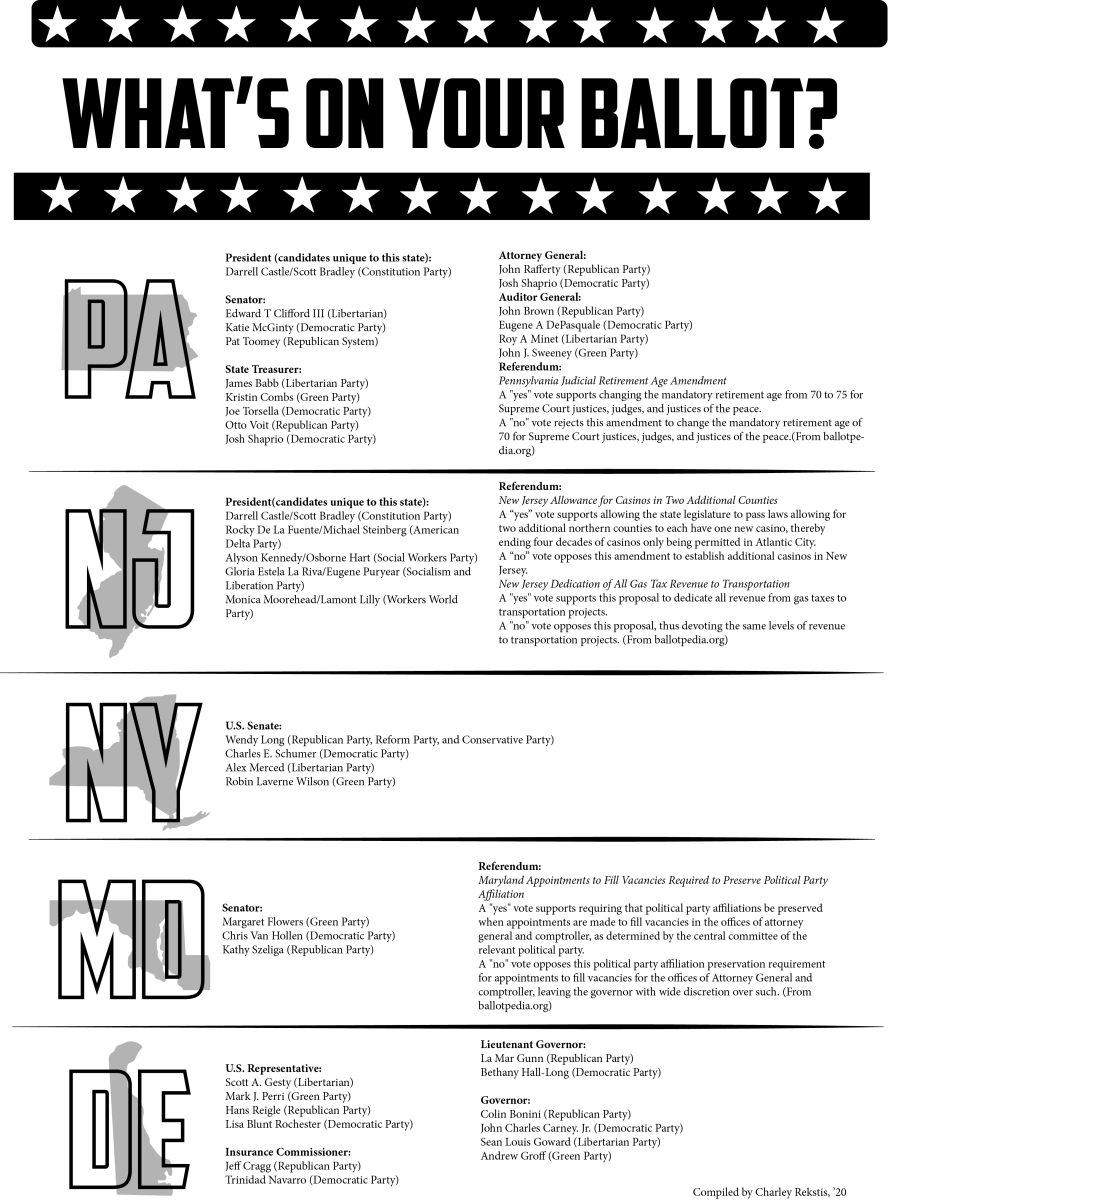 Whats on your ballot?